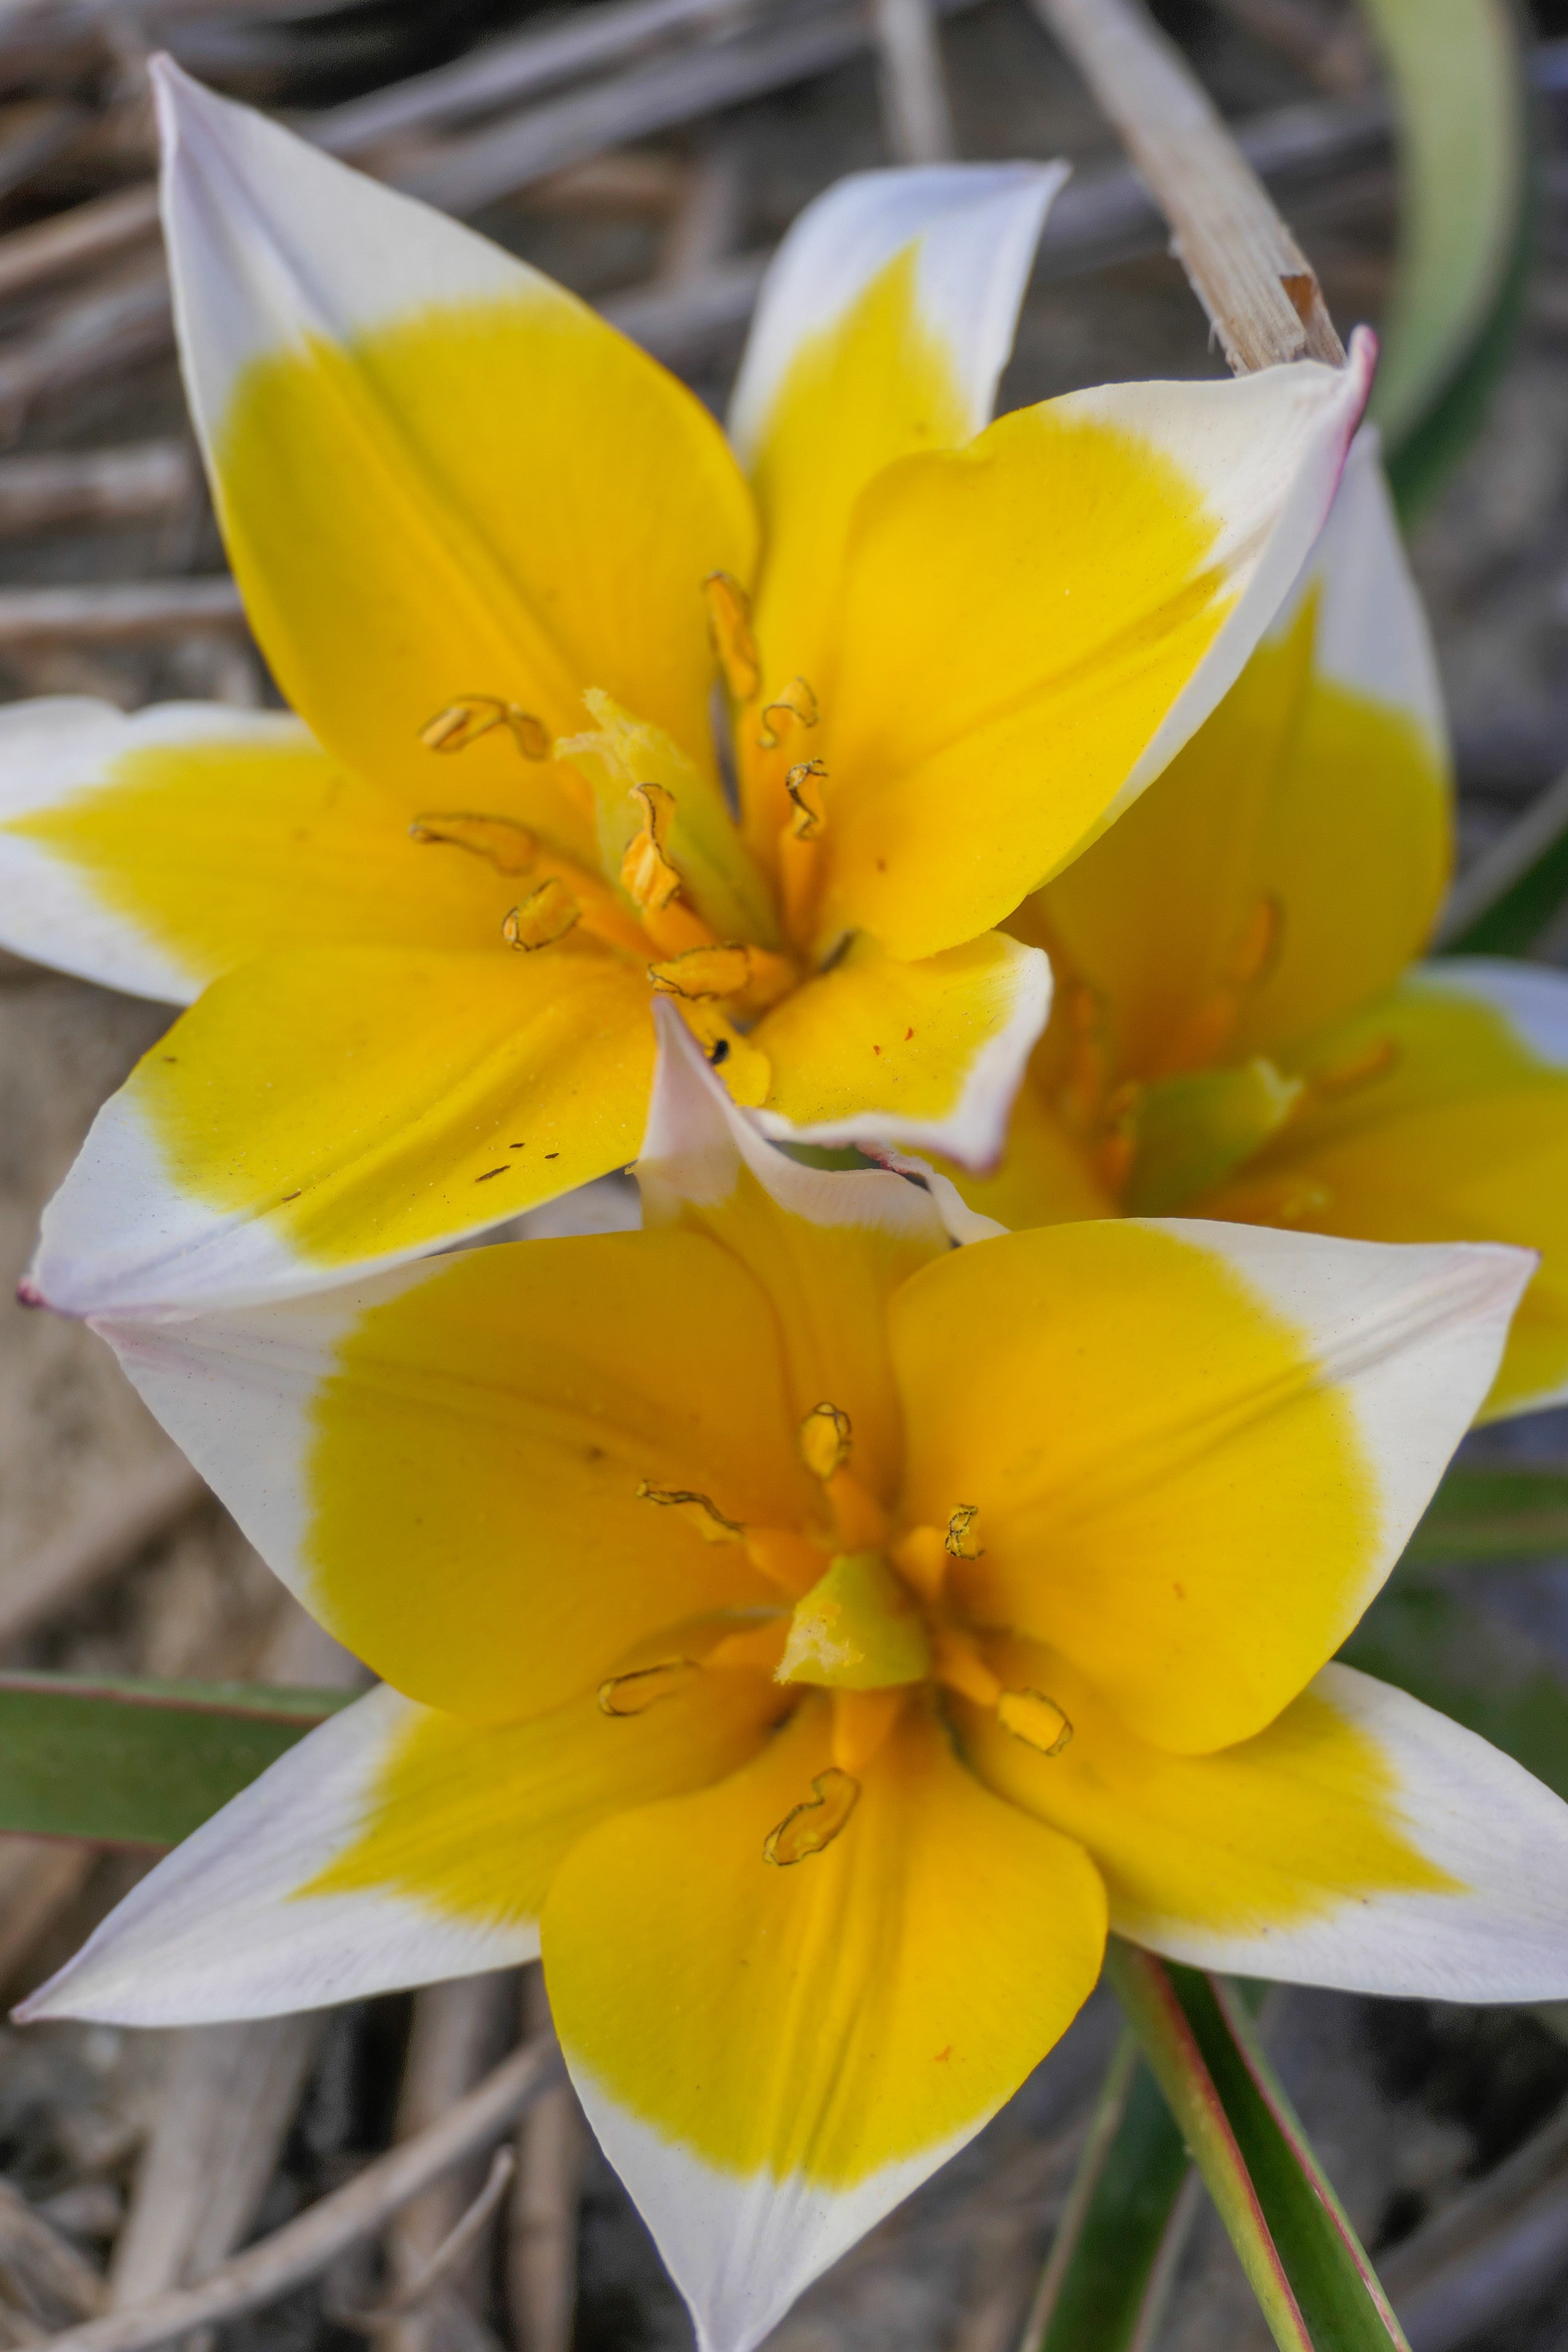 Close-up of a white and yellow Wild Flower tulip, Dasystemon Tarda.